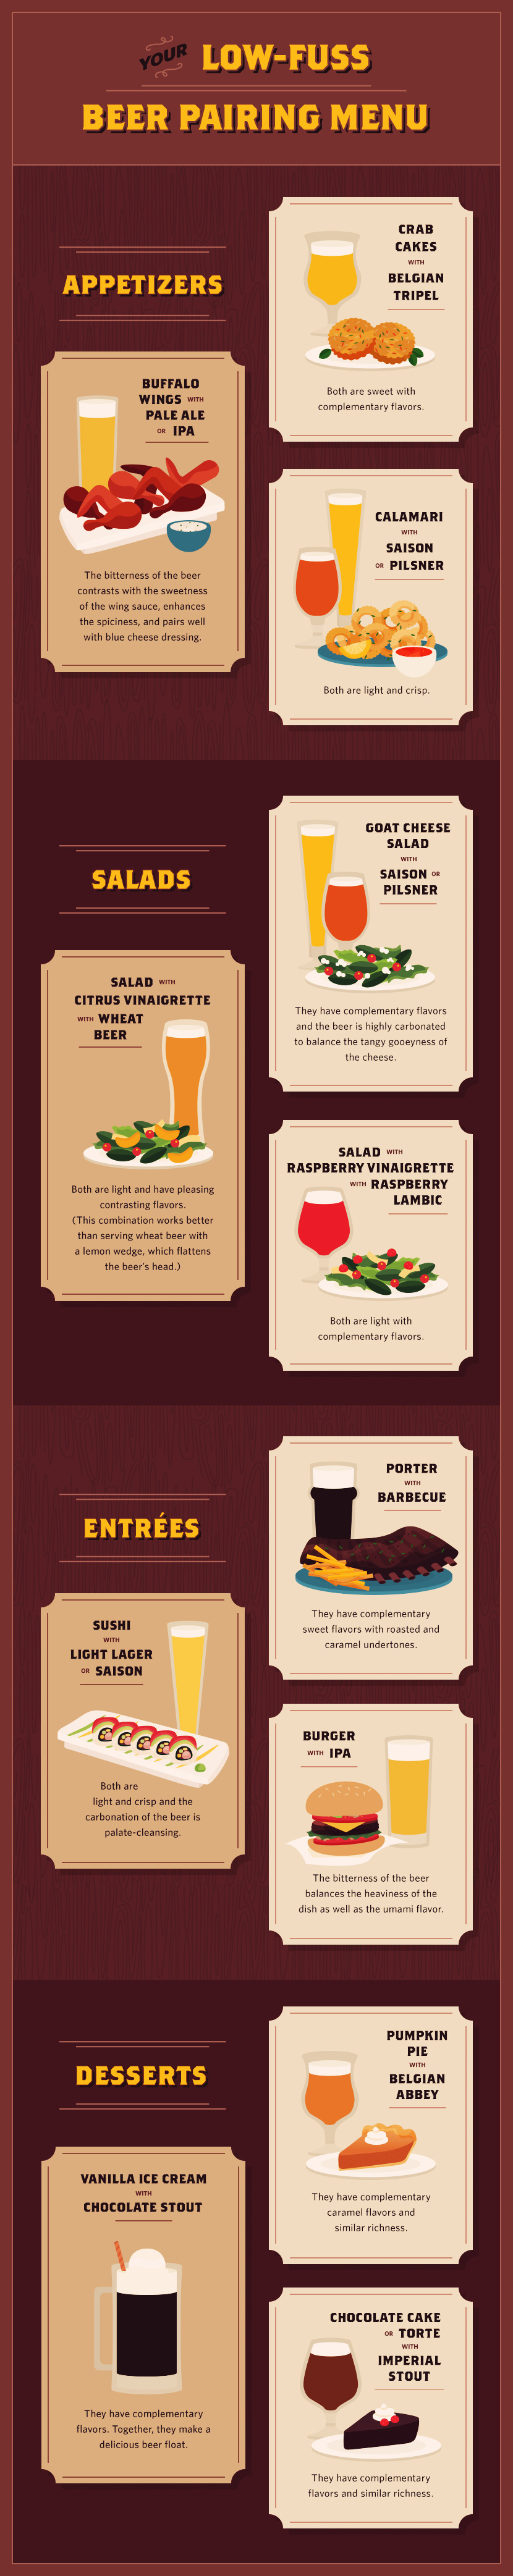 Pairing Craft Beer and Food | Fix.com